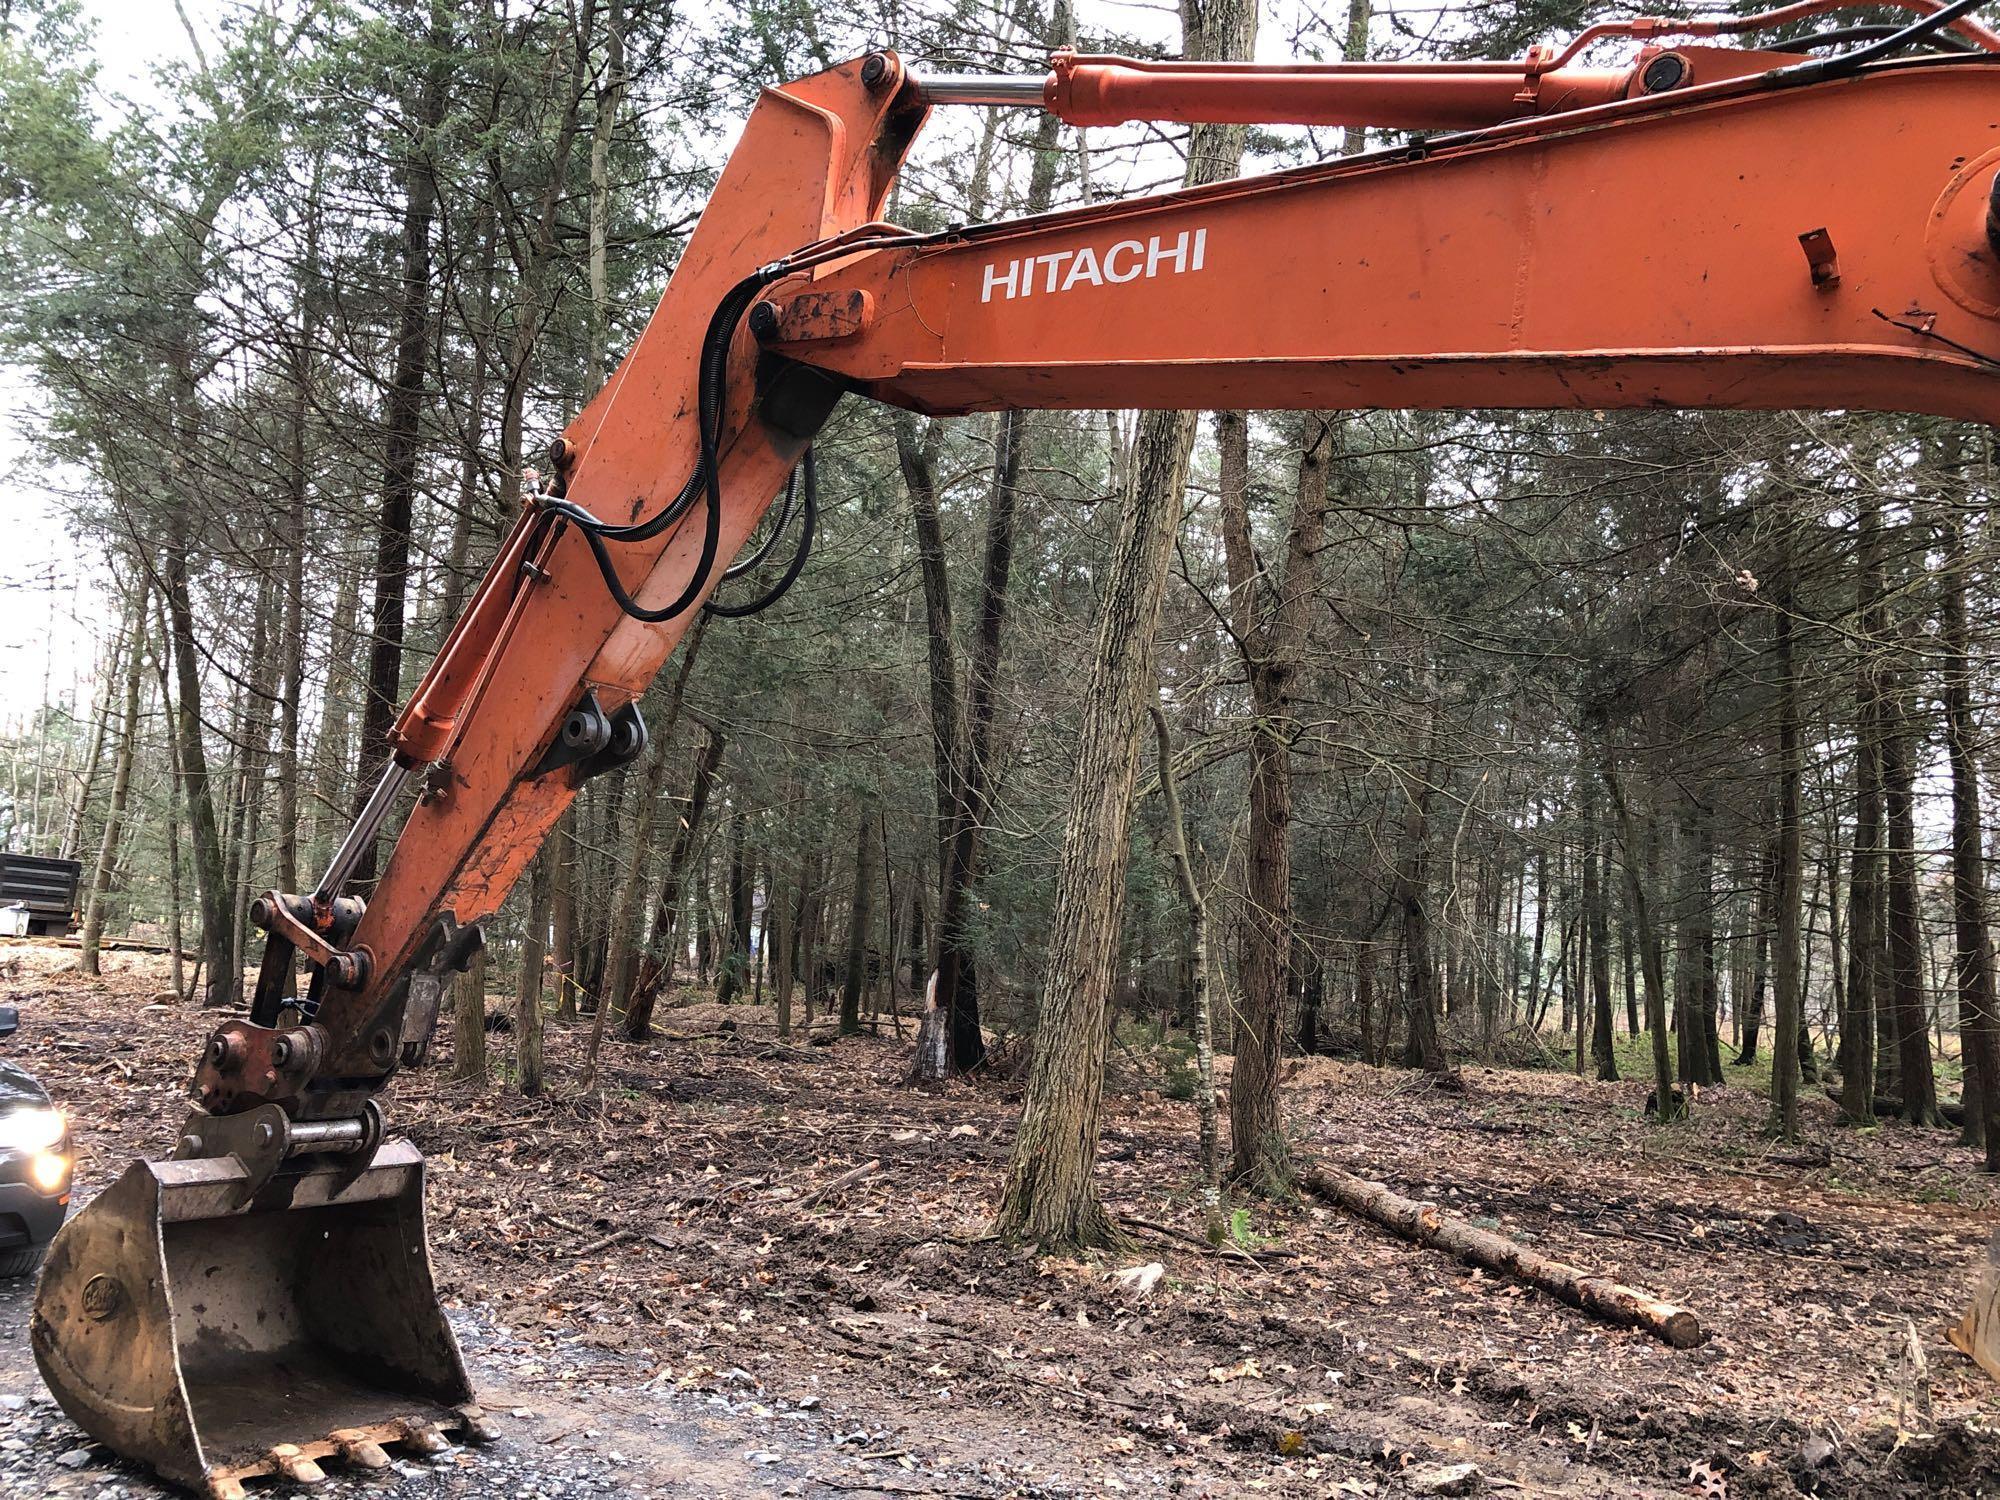 HITACHI track hoe(EX160LC;new main boom/42" tooth bucket;incab bucket disconnect;(6170 hours)